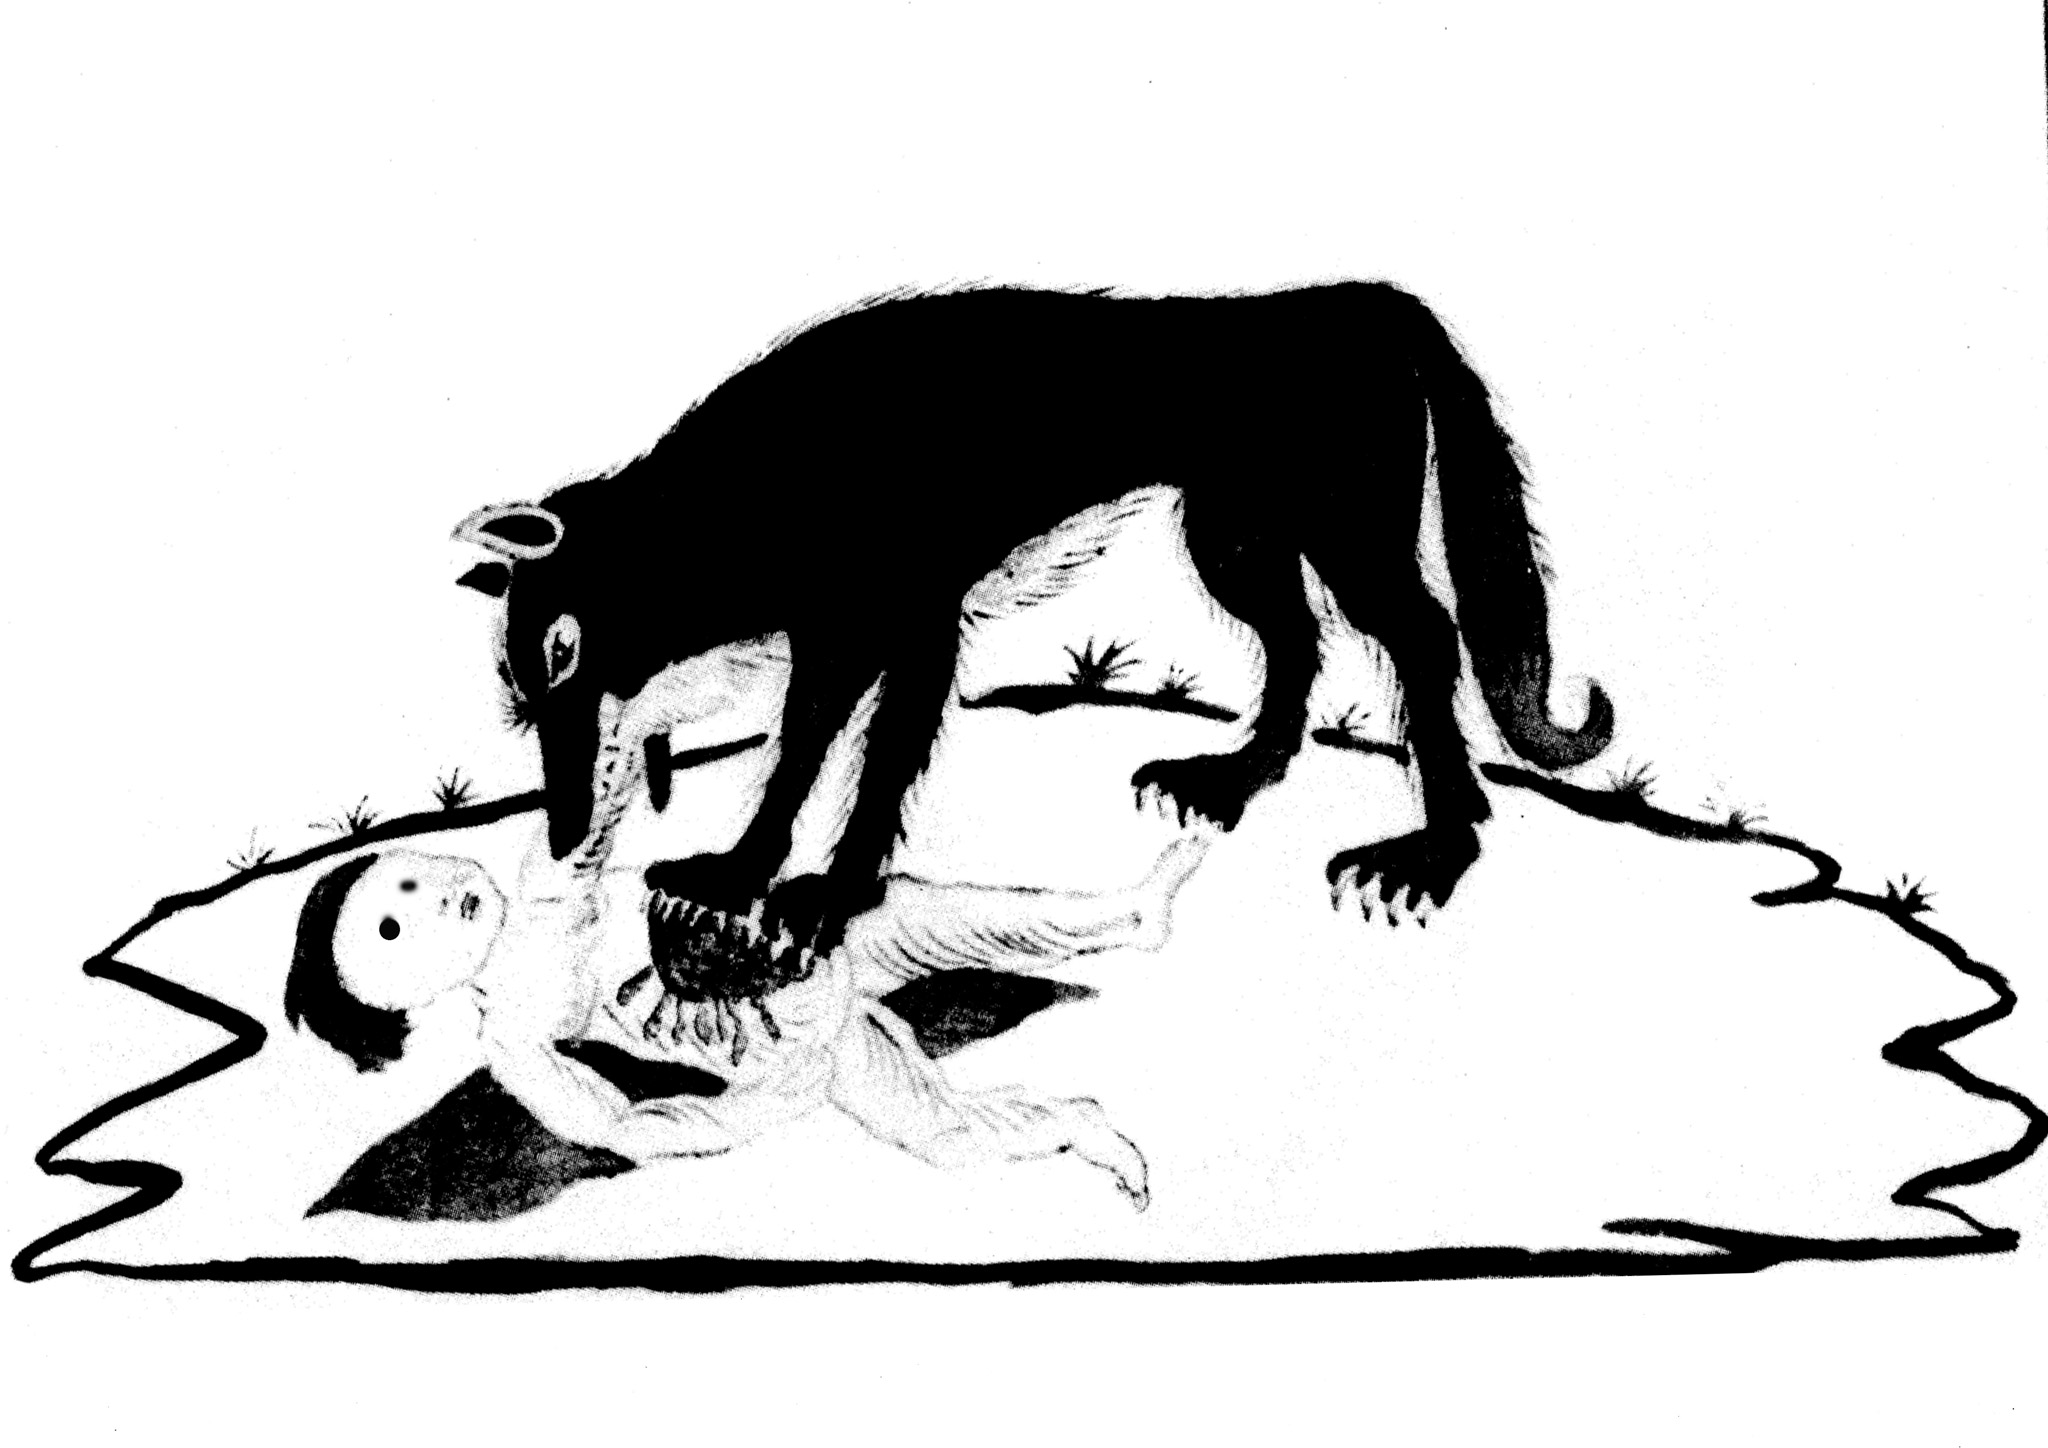 A black and white illustration of a wolf like creature killing a child.